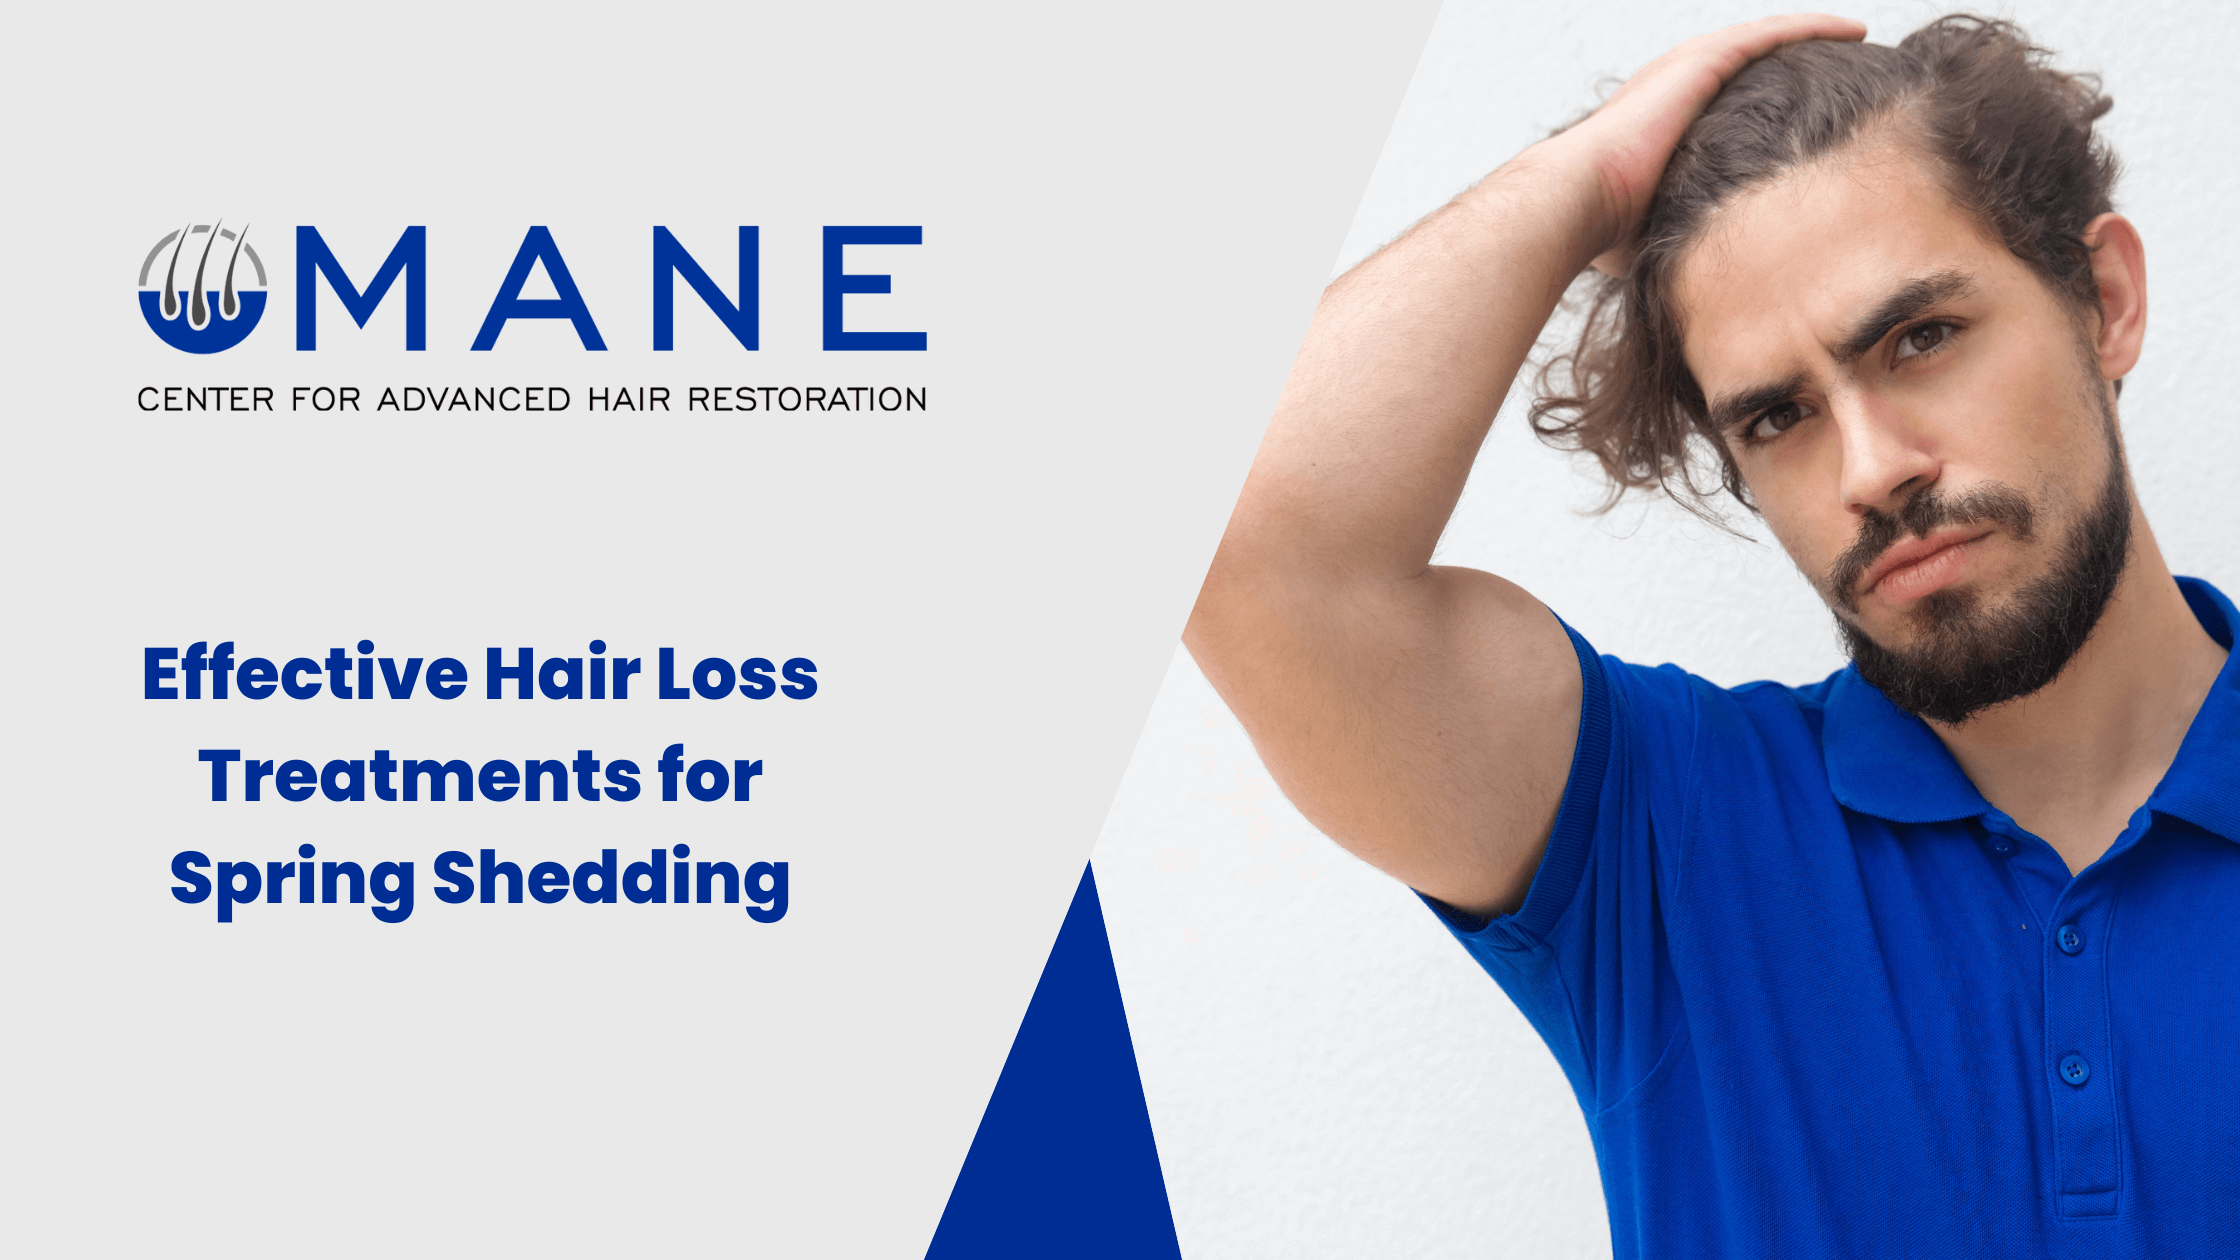 Effective Hair Loss Treatments for Spring Shedding